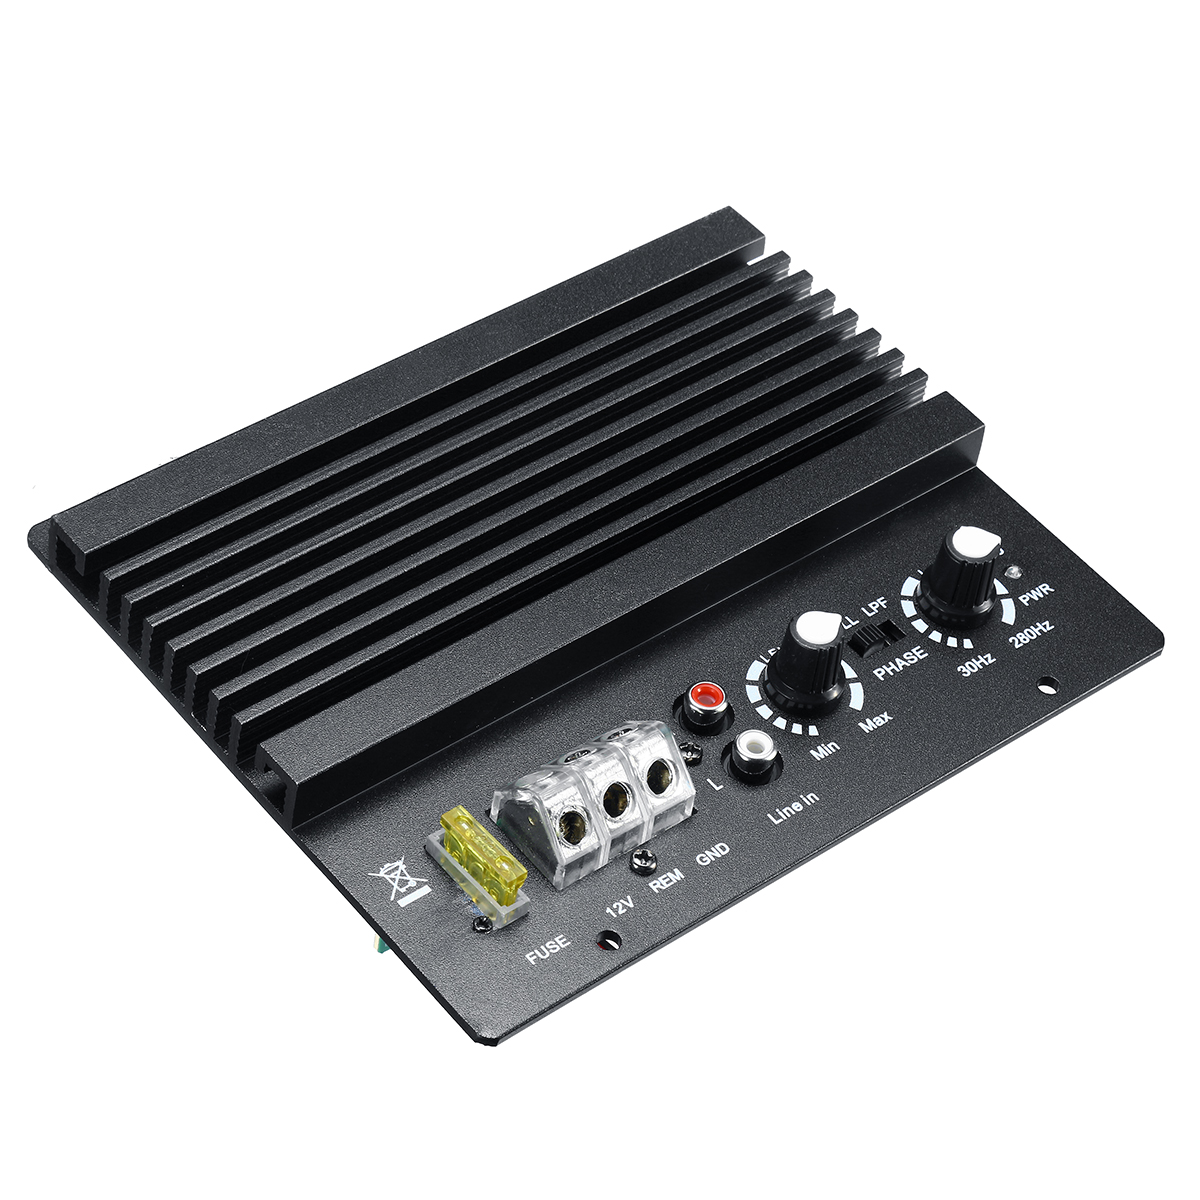 Power-Amplifier-Board-Powerful-Bass-Subwoofer-Amp-Amplify-Module-12V-300W-for-Car-Audio-Stereo-1428313